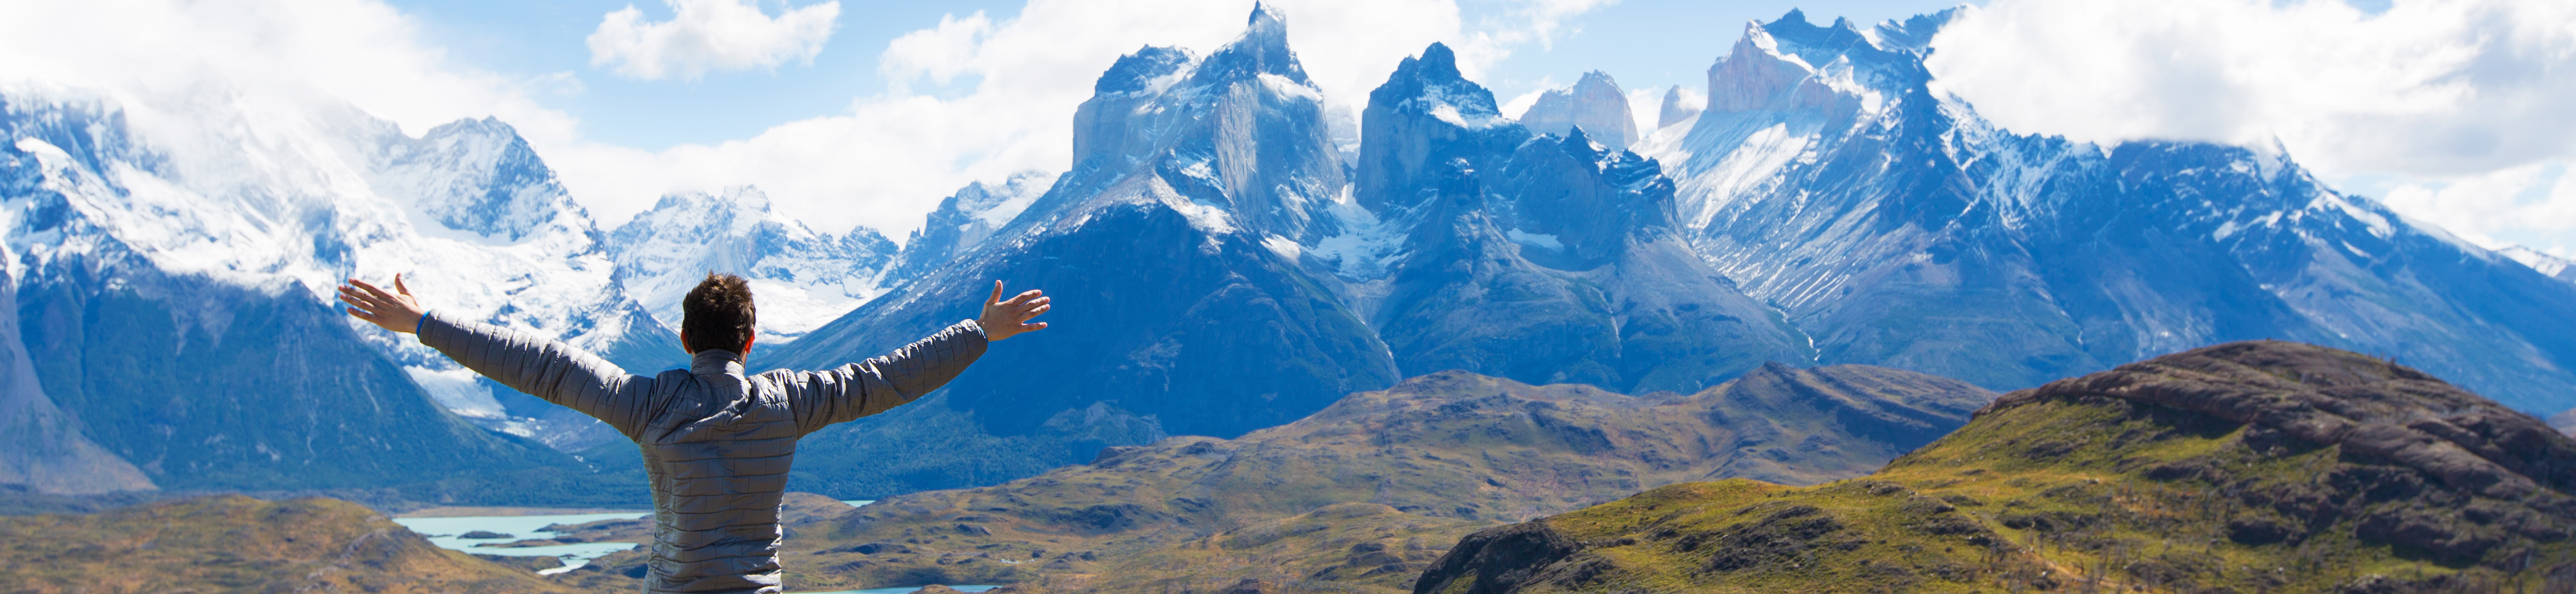 man with arms raised looking at a mountain range in patagonia, chile